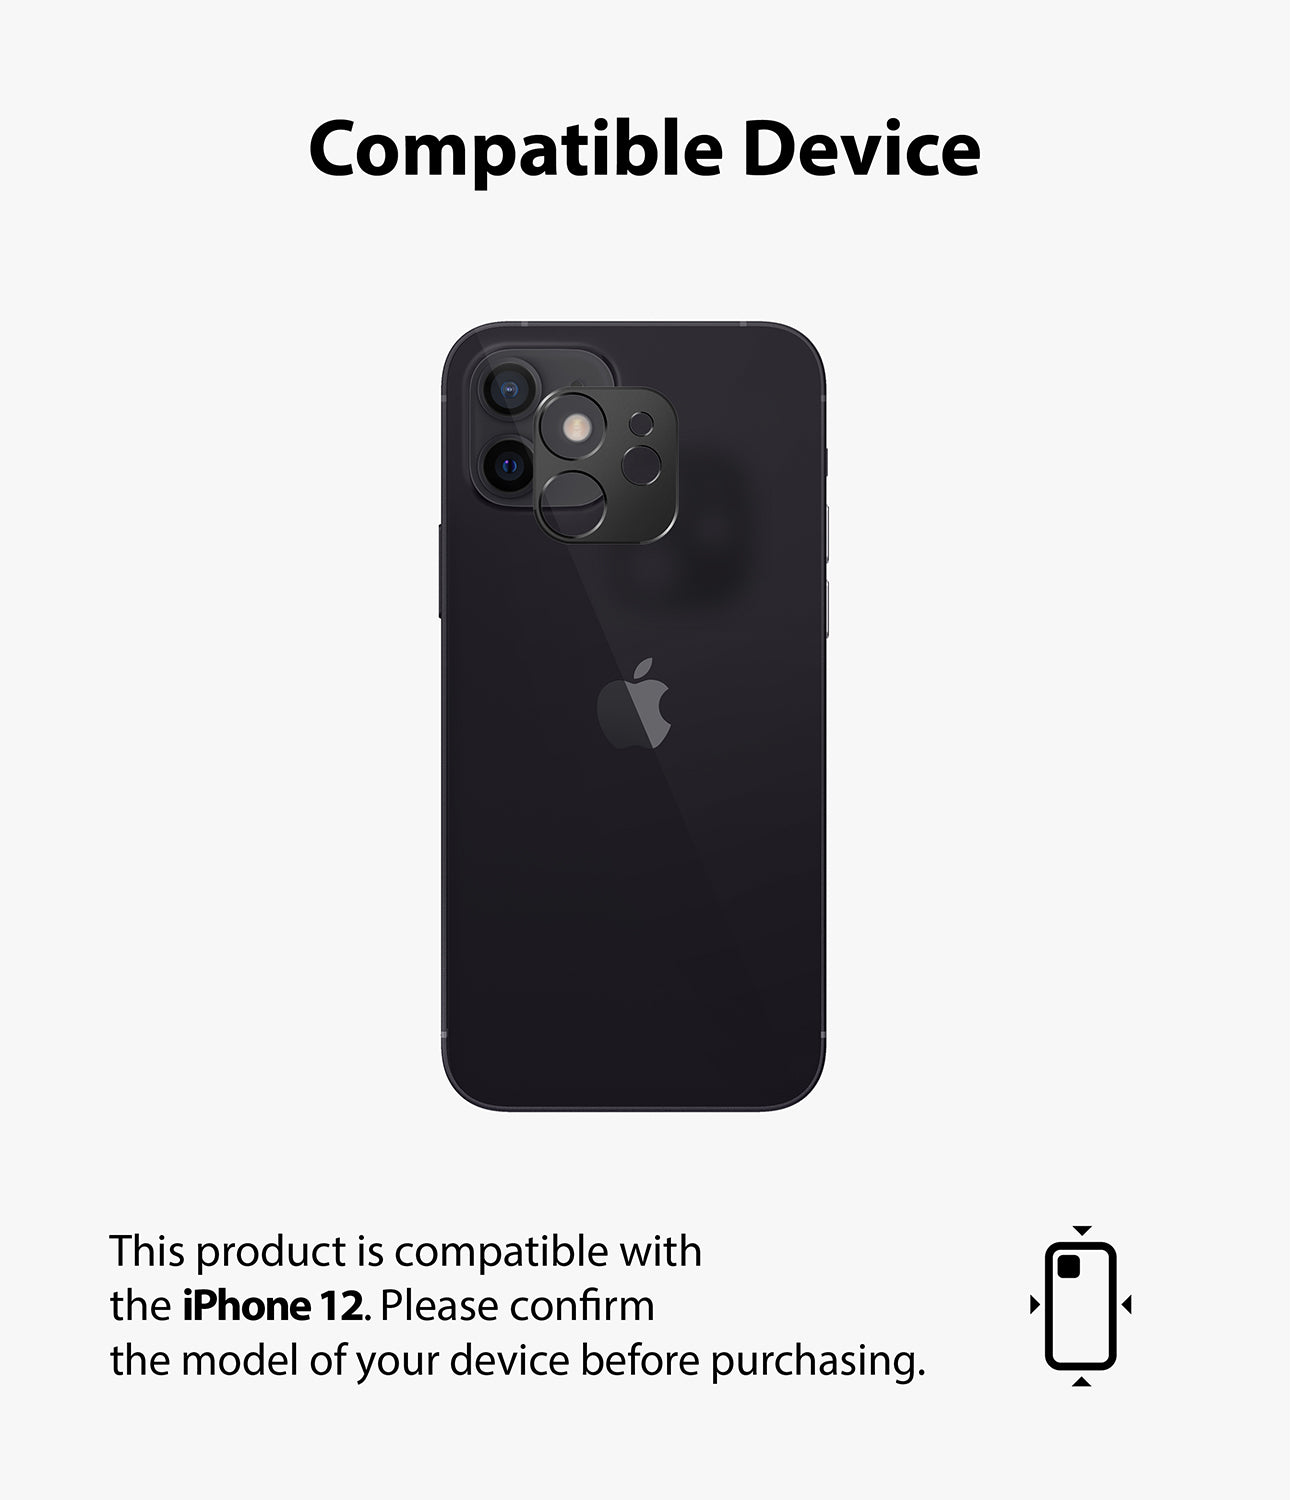 only compatible with iphone 12